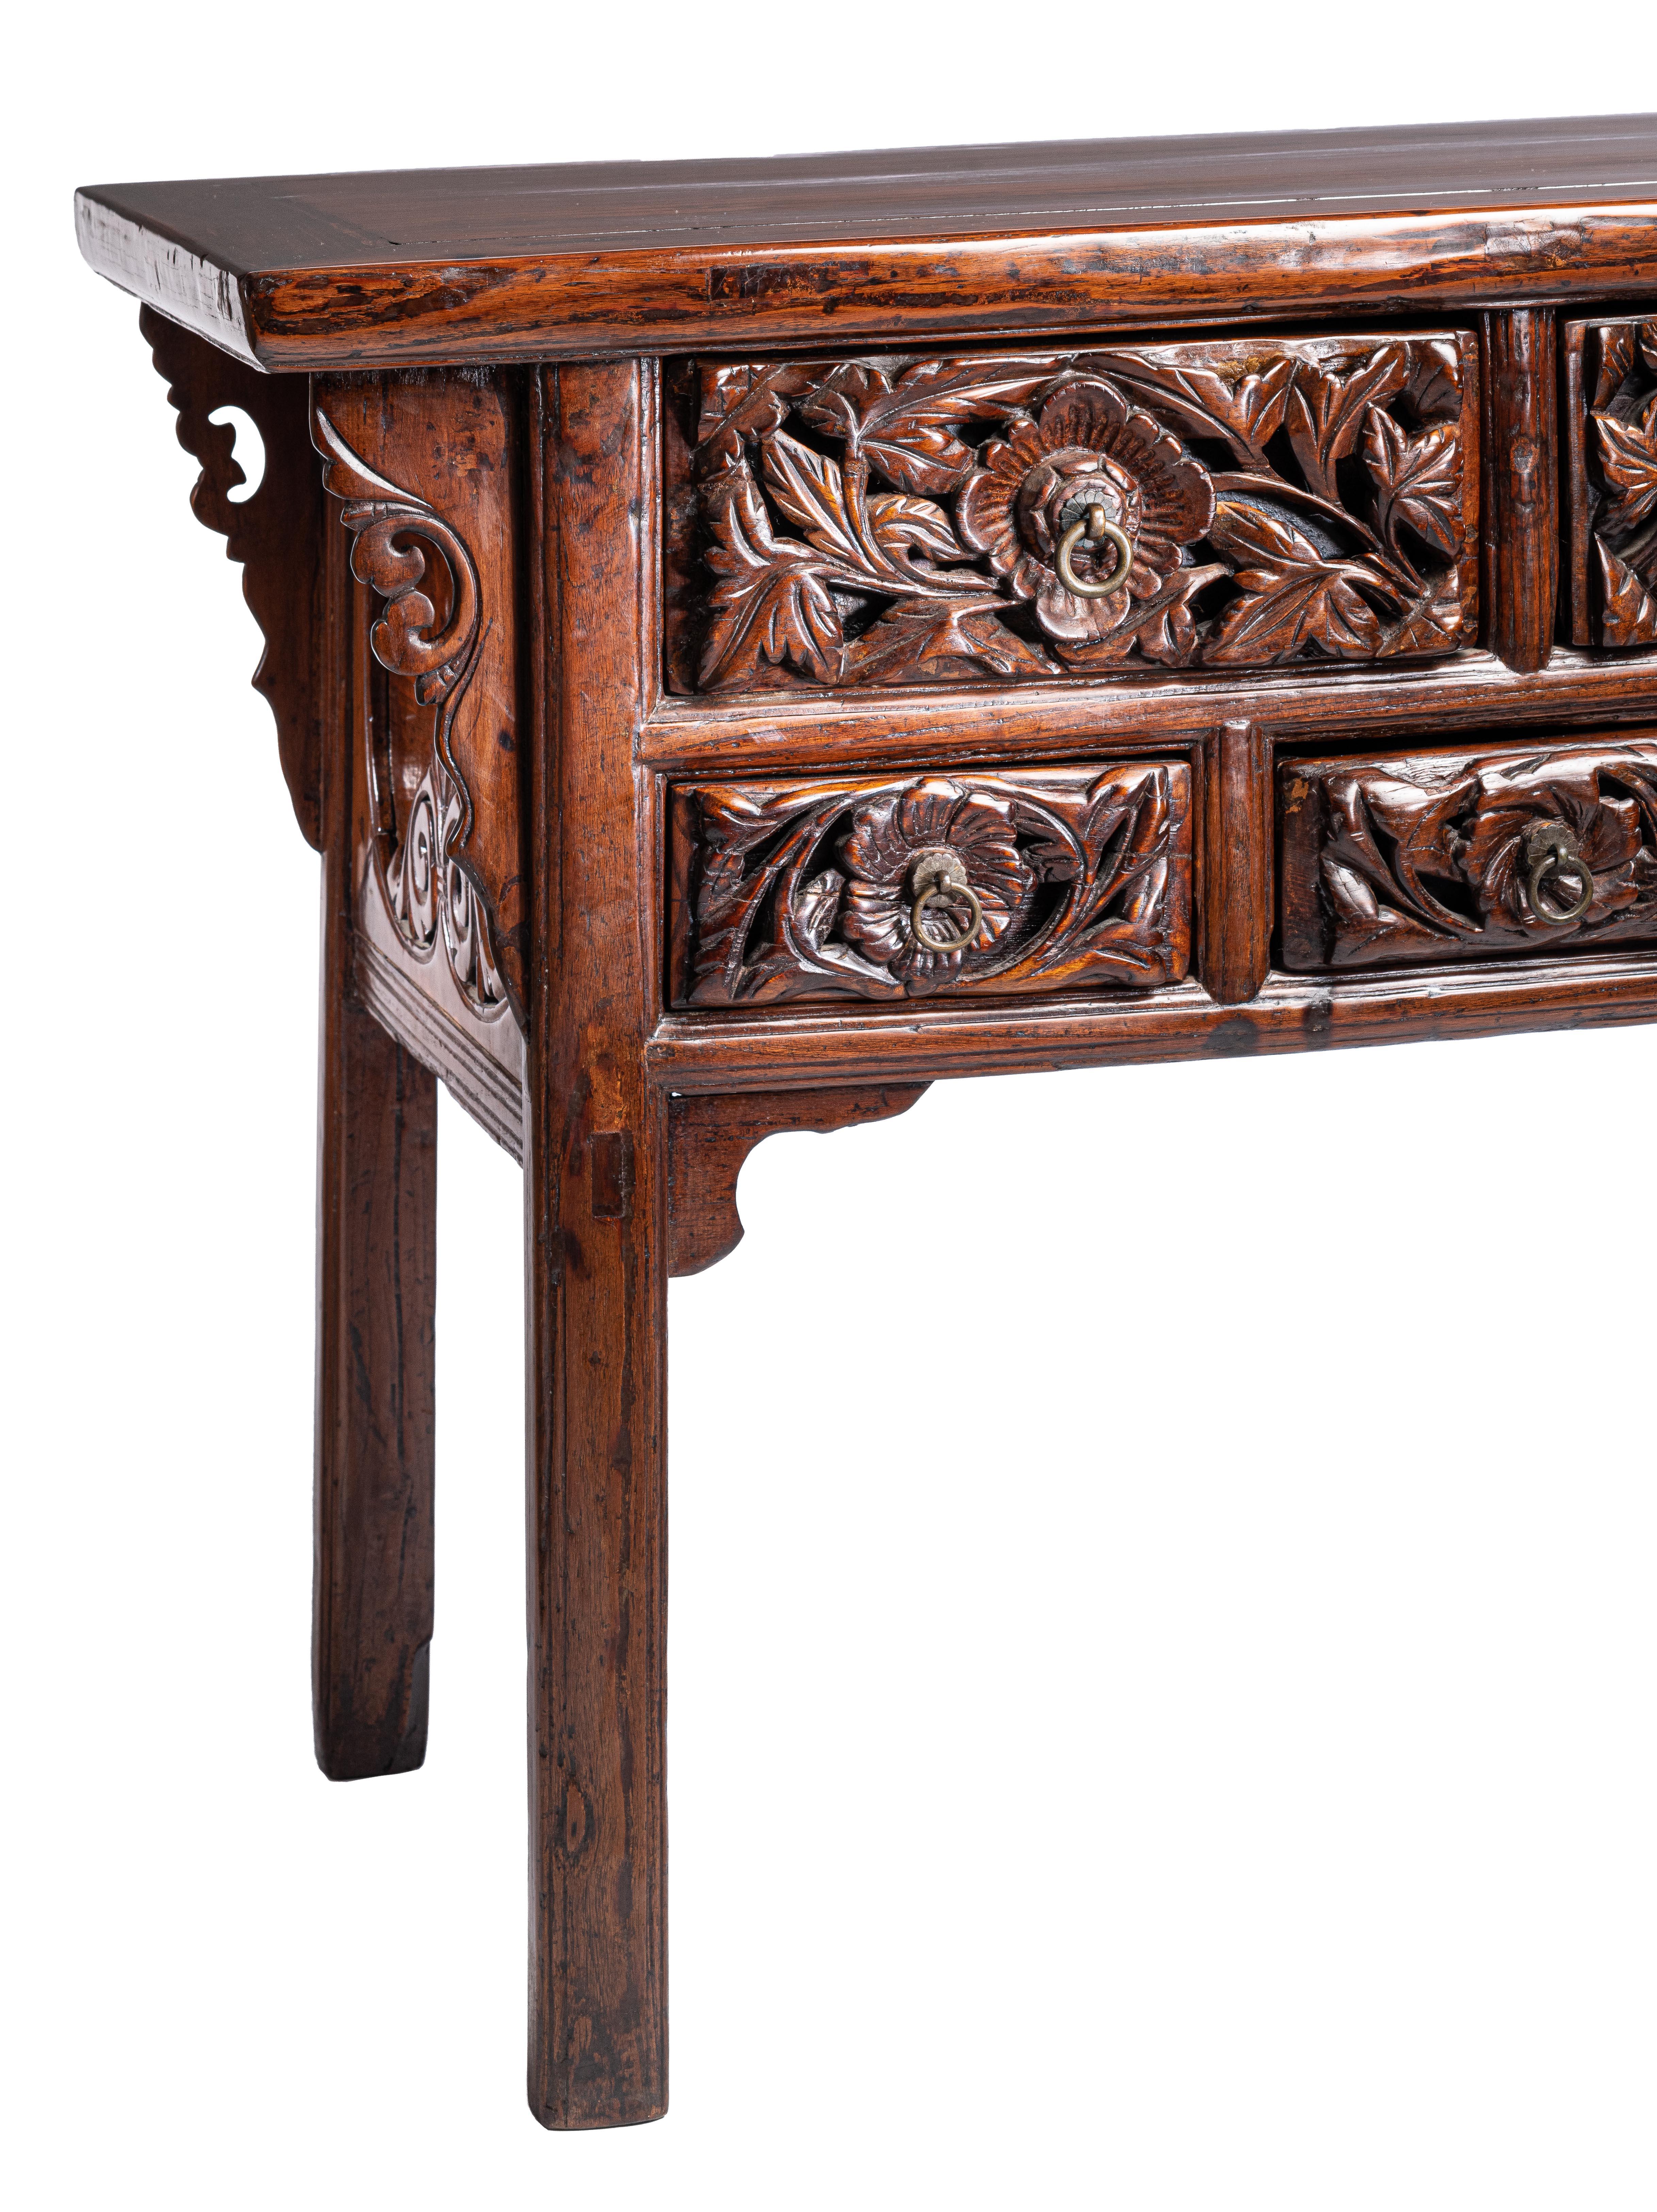 Fine Raised Coffer

The fine raised coffer with a floating top panel, enclosed within a frame with a molded ice-plate edge, supported on recessed rectangular-sectioned recessed legs decorated with open-carved ruyi foliage spandrels, a pair of